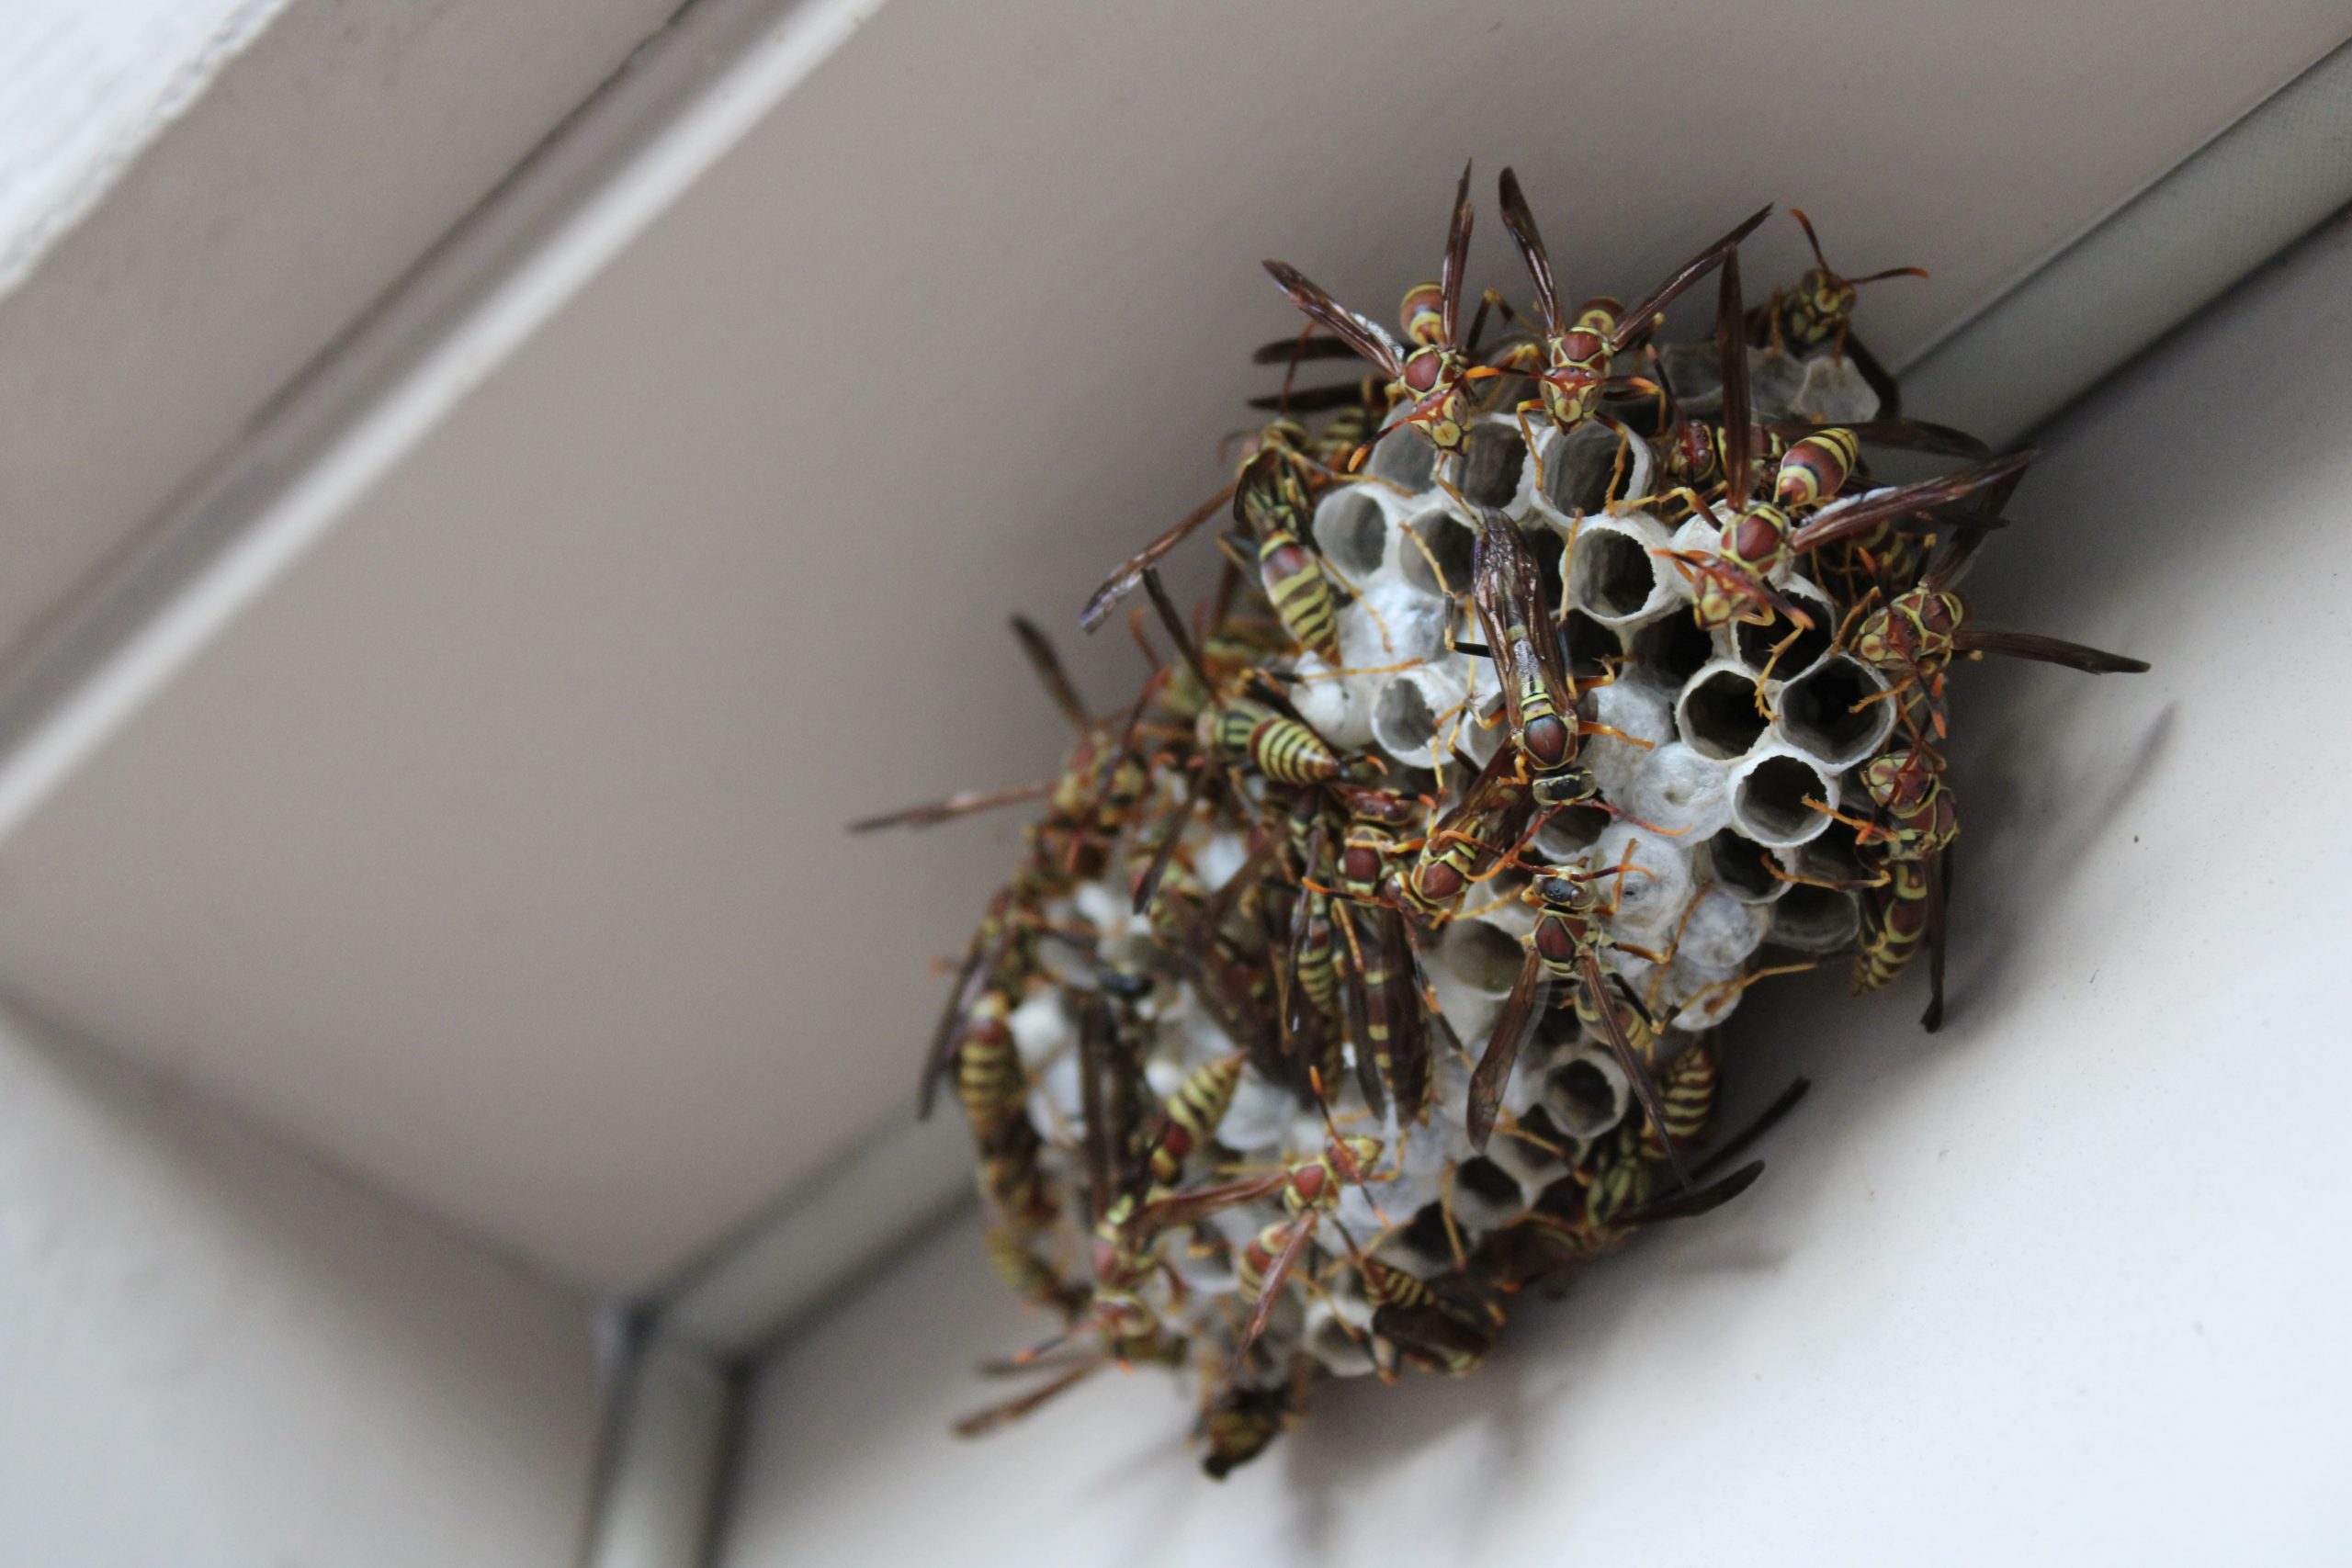 Wasps Nest In Loft – Should I Leave It Alone?